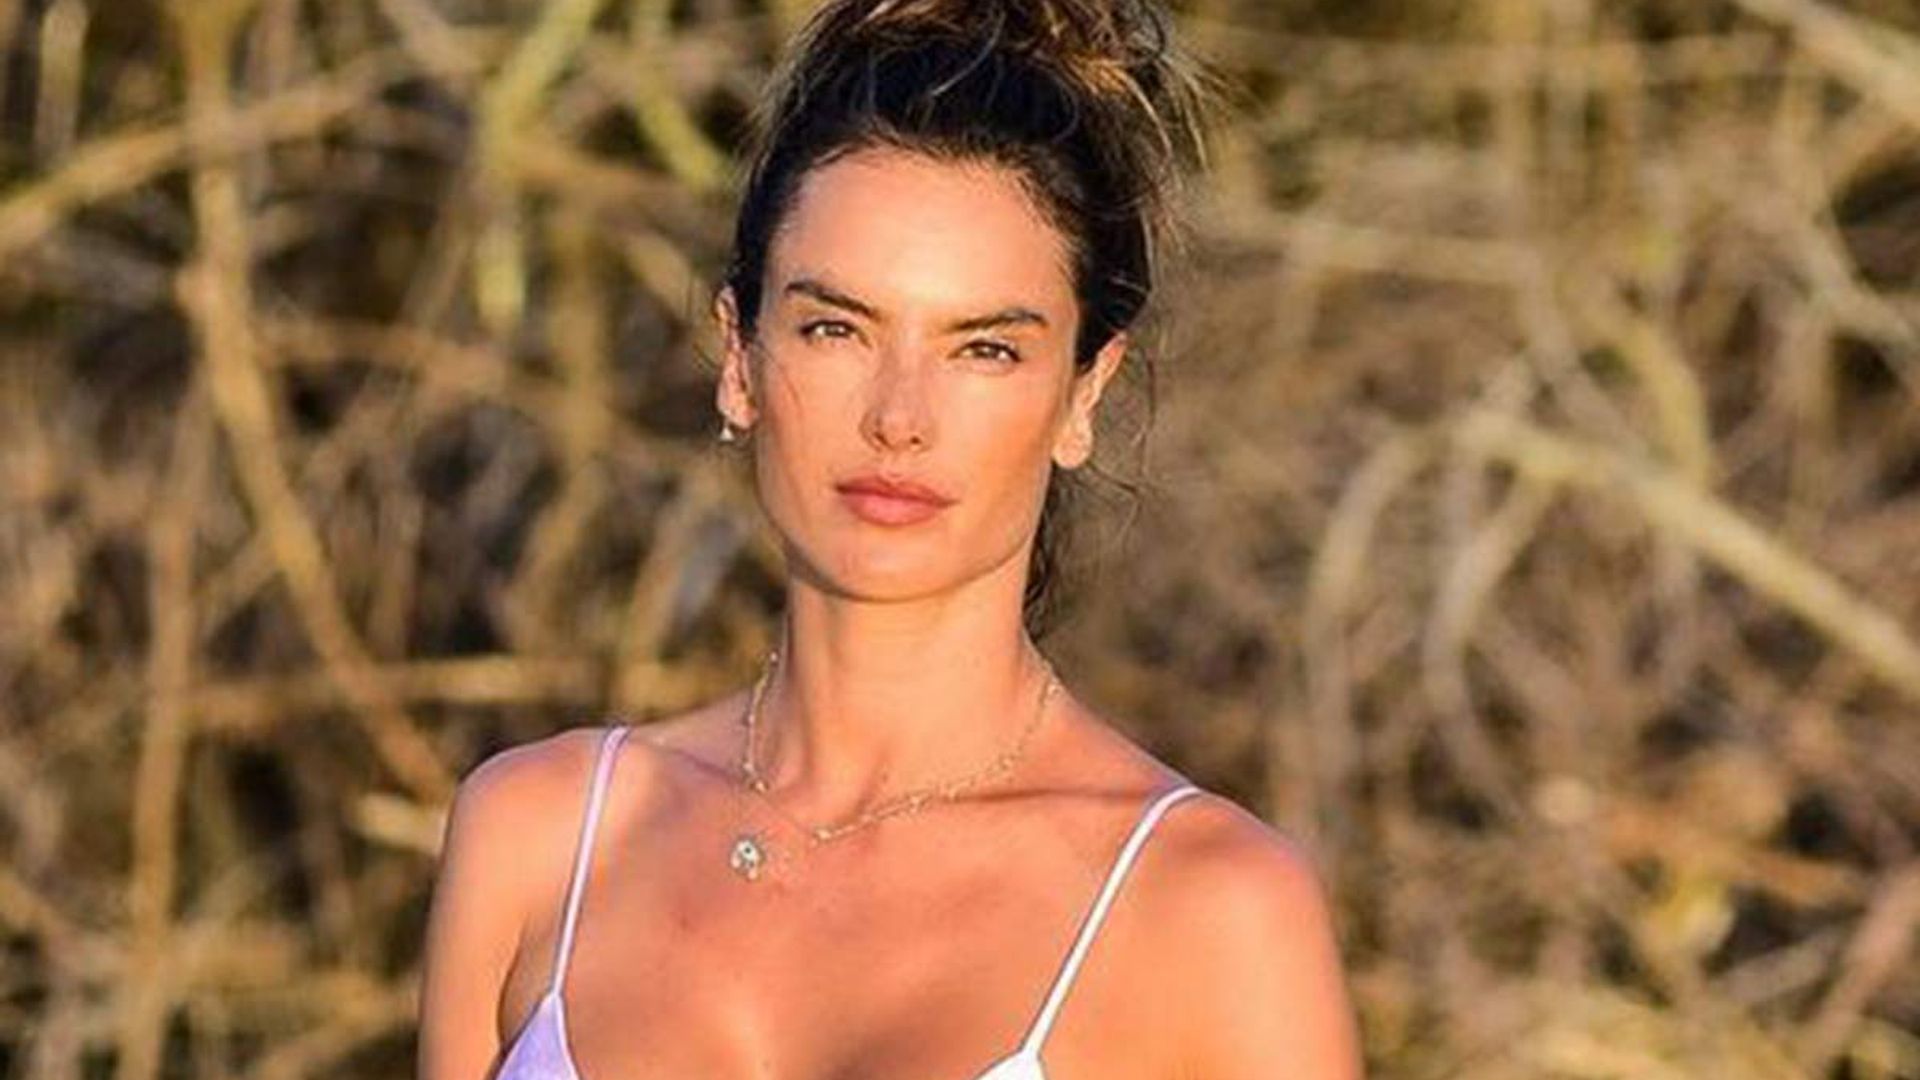 This Is How Victoria's Secret Models Get Incredible Cleavage In Bikinis